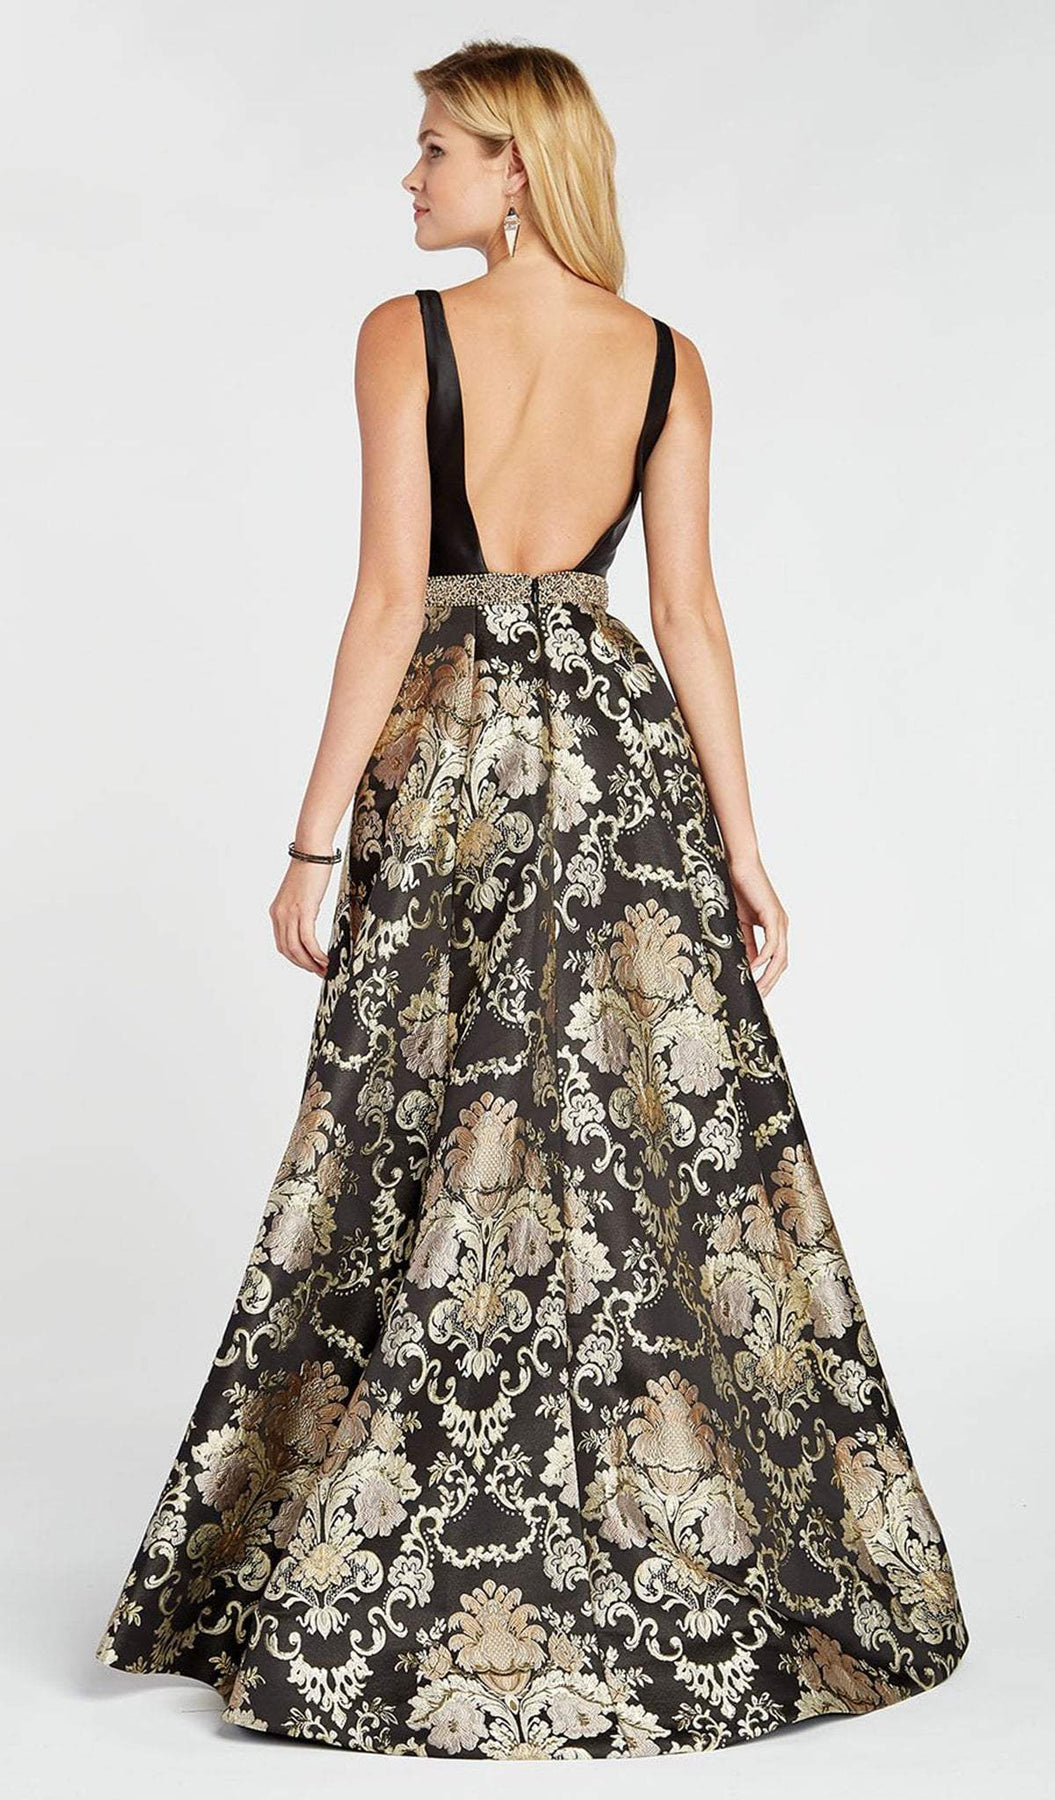 Alyce Paris - 60399 Sleeveless Floral Brocade A-Line Gown In Black and Gold